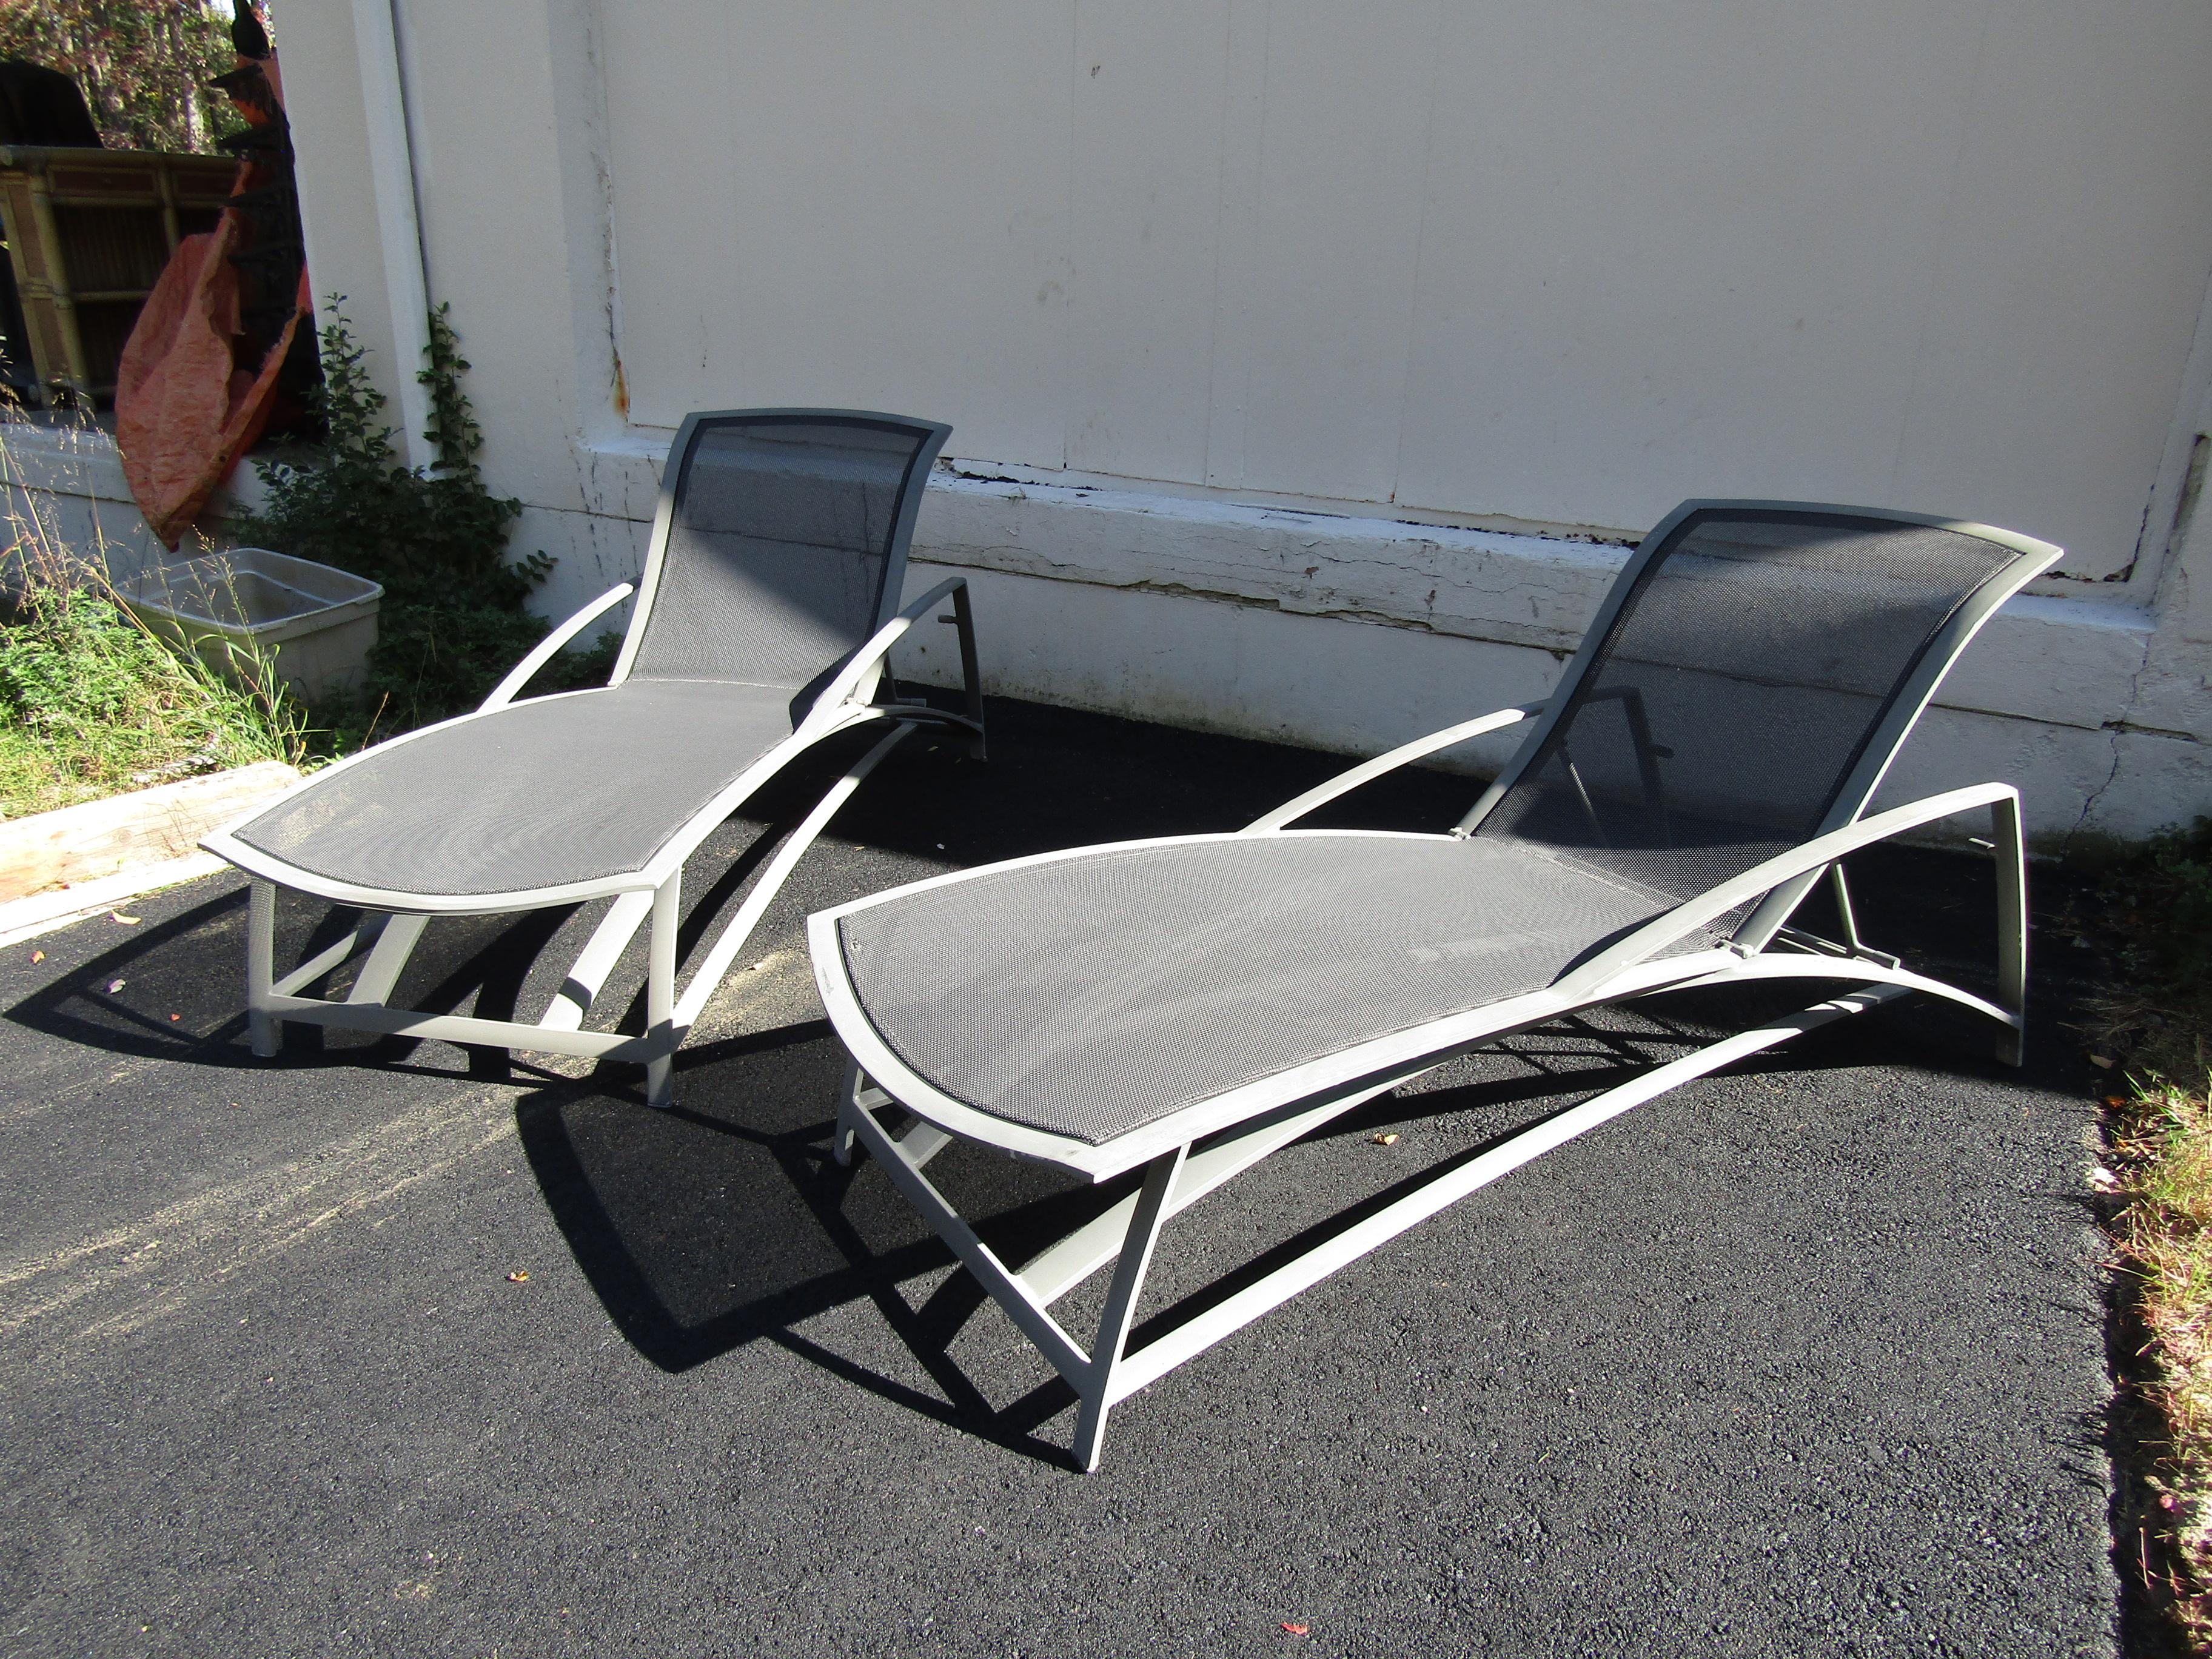 A beautiful set of aluminum outdoor furniture by Jordan Brown. This set includes a glass top coffee table, two lounge chairs, a dining table, four dining chairs, a set of two nesting tables, and two adjustable chaise lounges. Extremely stylish and